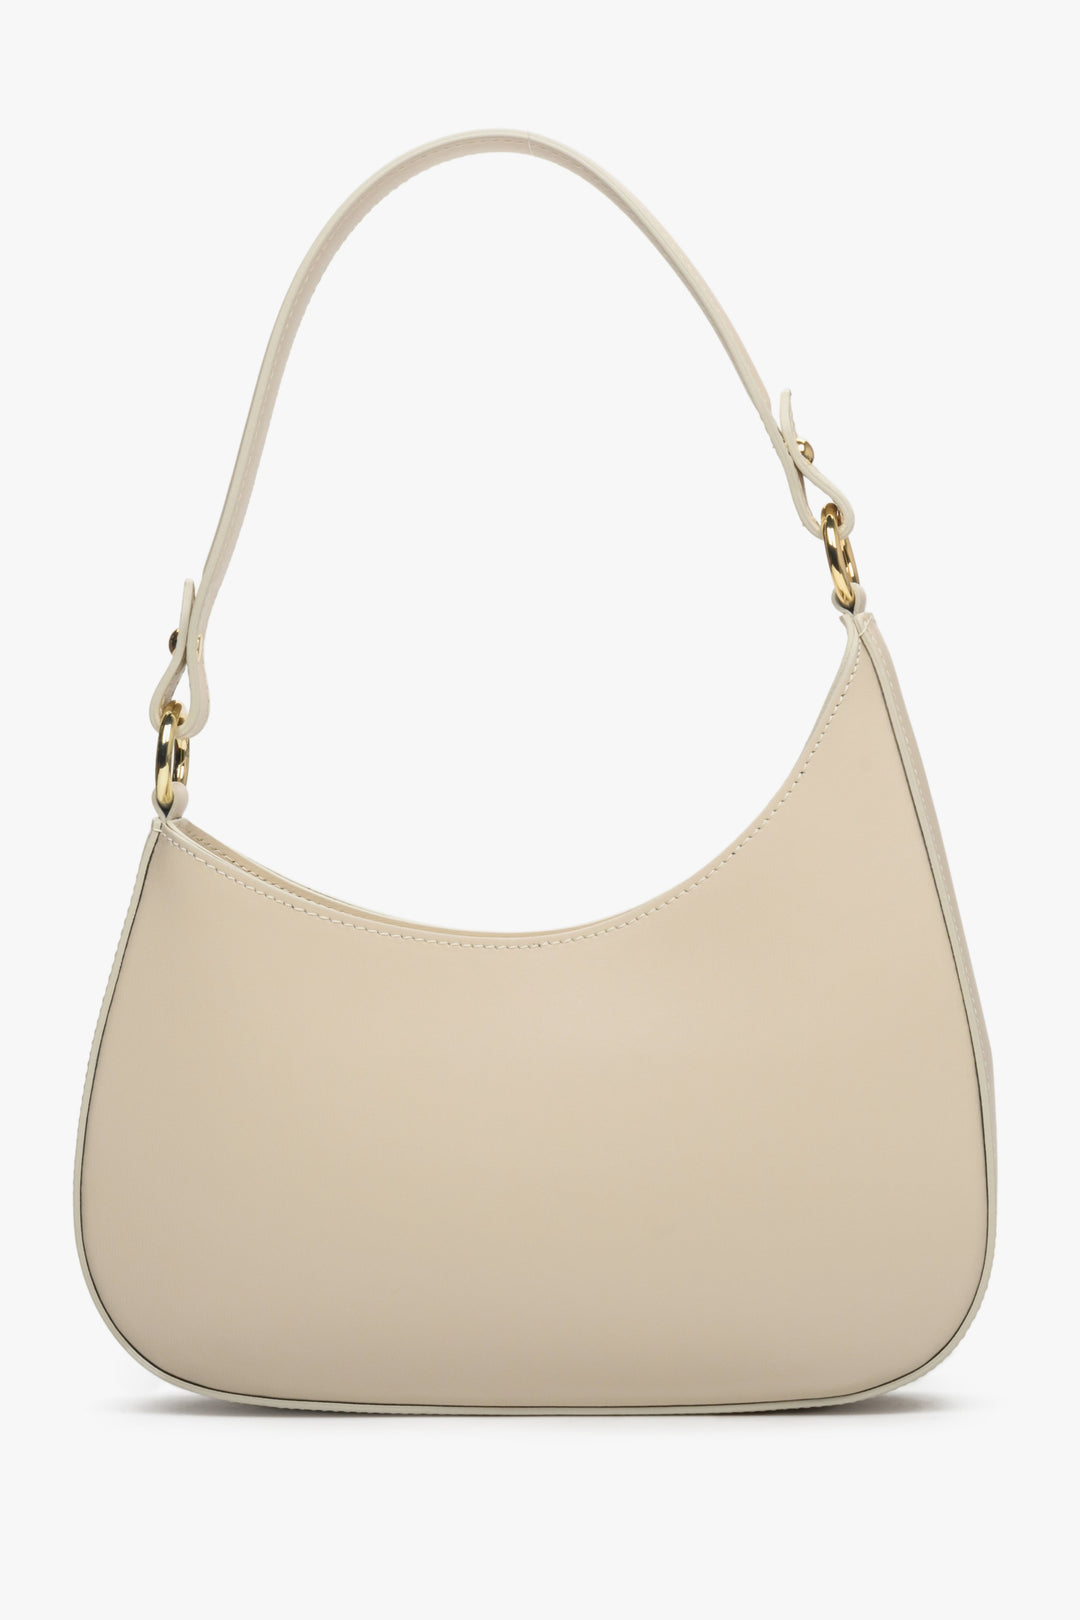 Estro women's handbag in sand beige natural leather sewn in Italy.